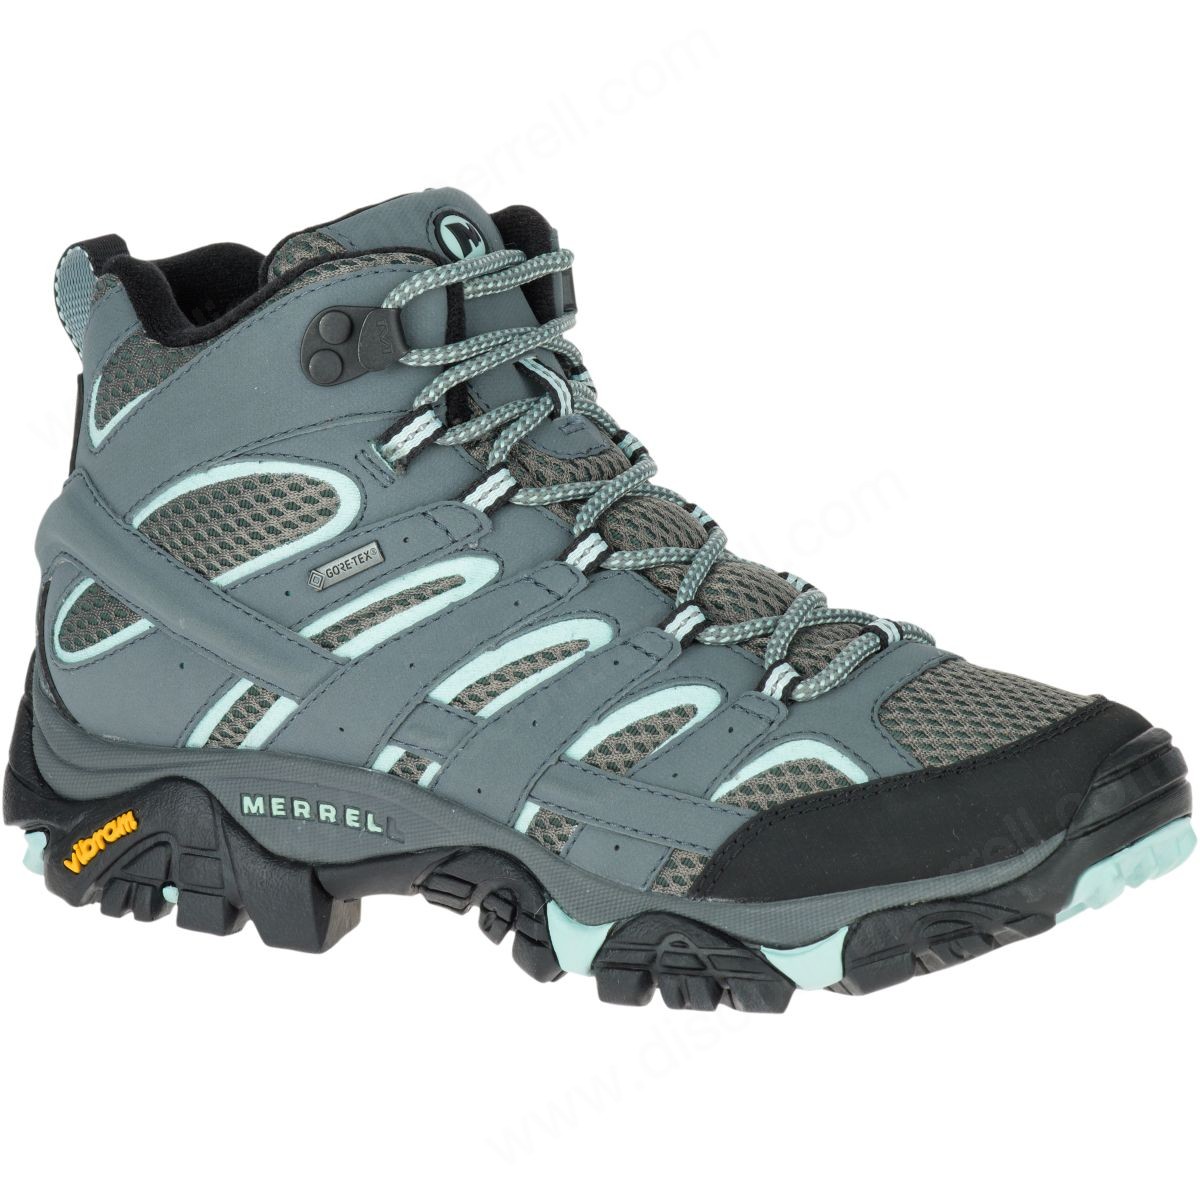 Merrell Women's Moab Mother Of All Boots™ Mid Gore-Tex® Sedona Sage - Merrell Women's Moab Mother Of All Boots™ Mid Gore-Tex® Sedona Sage